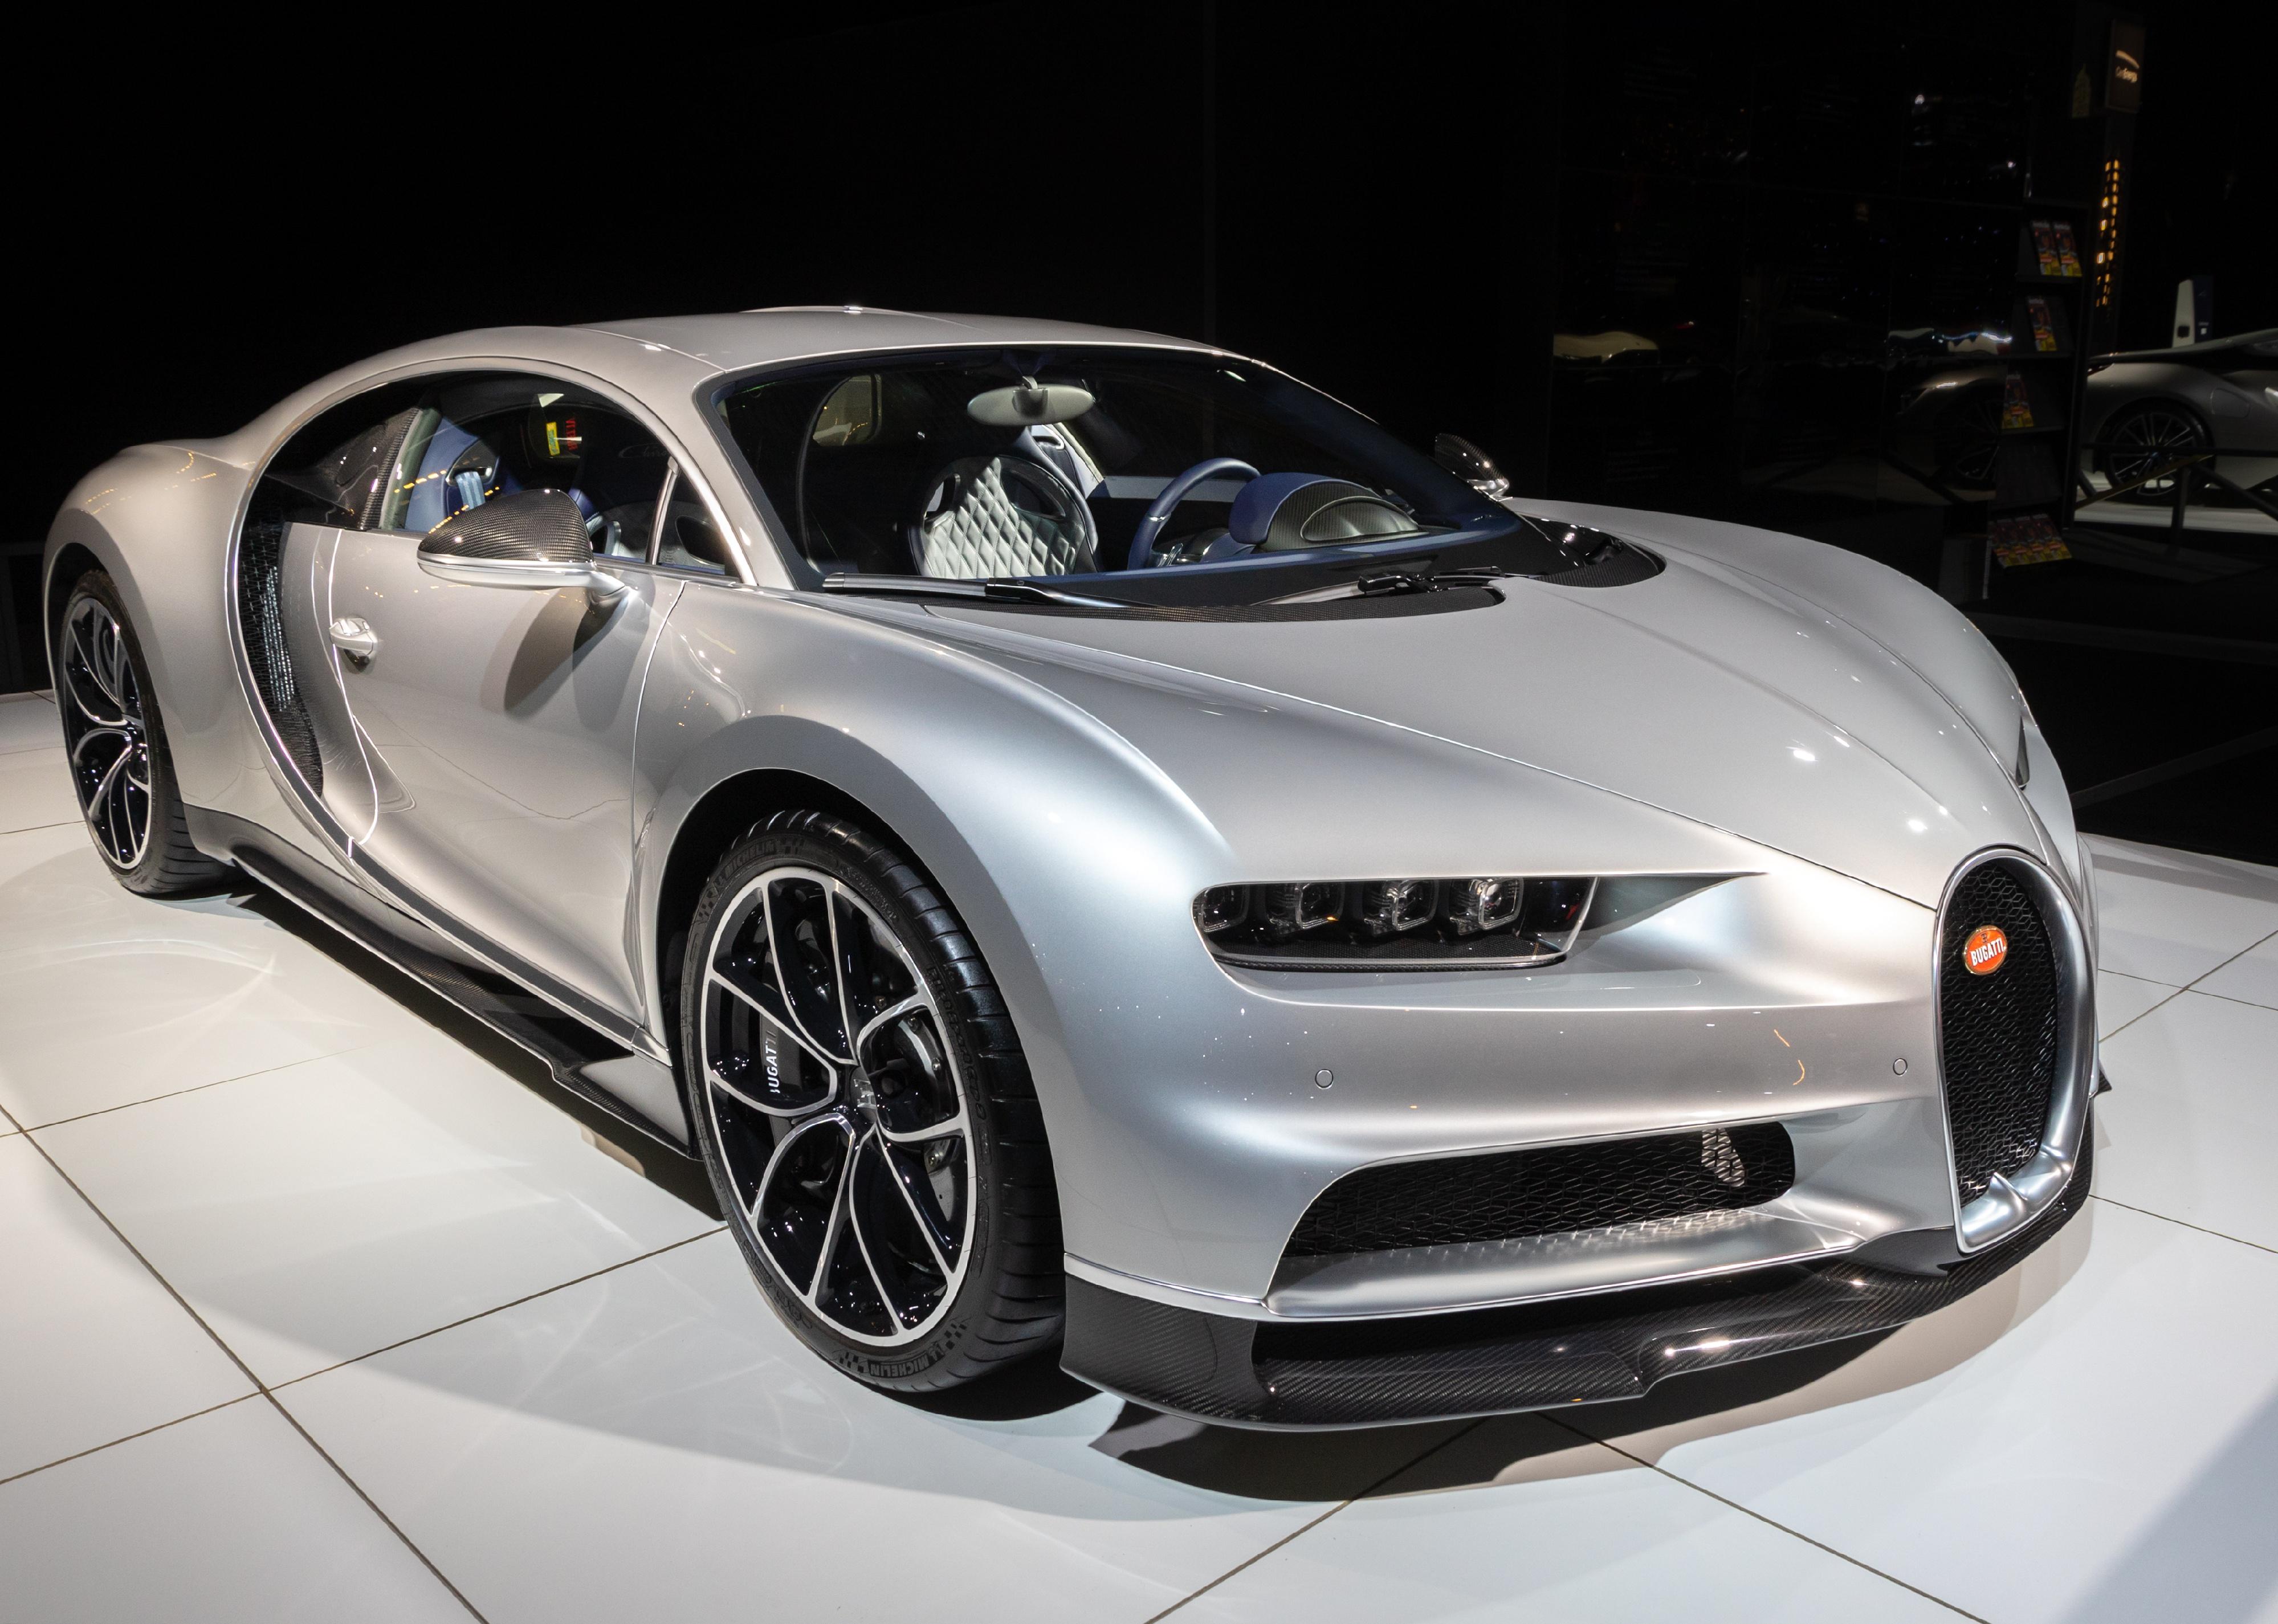 Bugatti Chiron sports car showcased at the 97th Brussels Motor Show 2019.